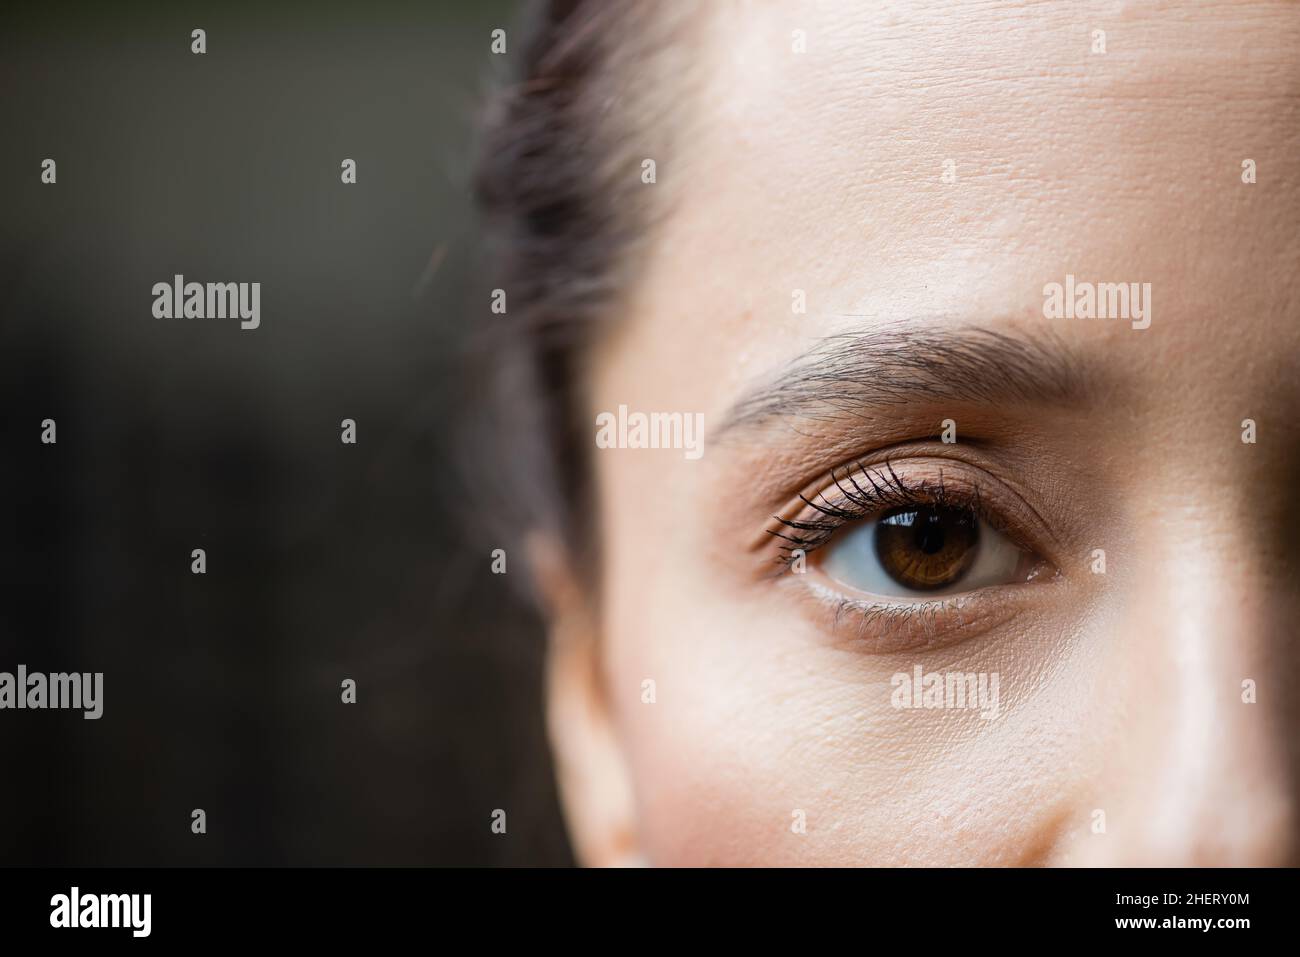 partial view of young woman looking at camera, eye care concept Stock Photo